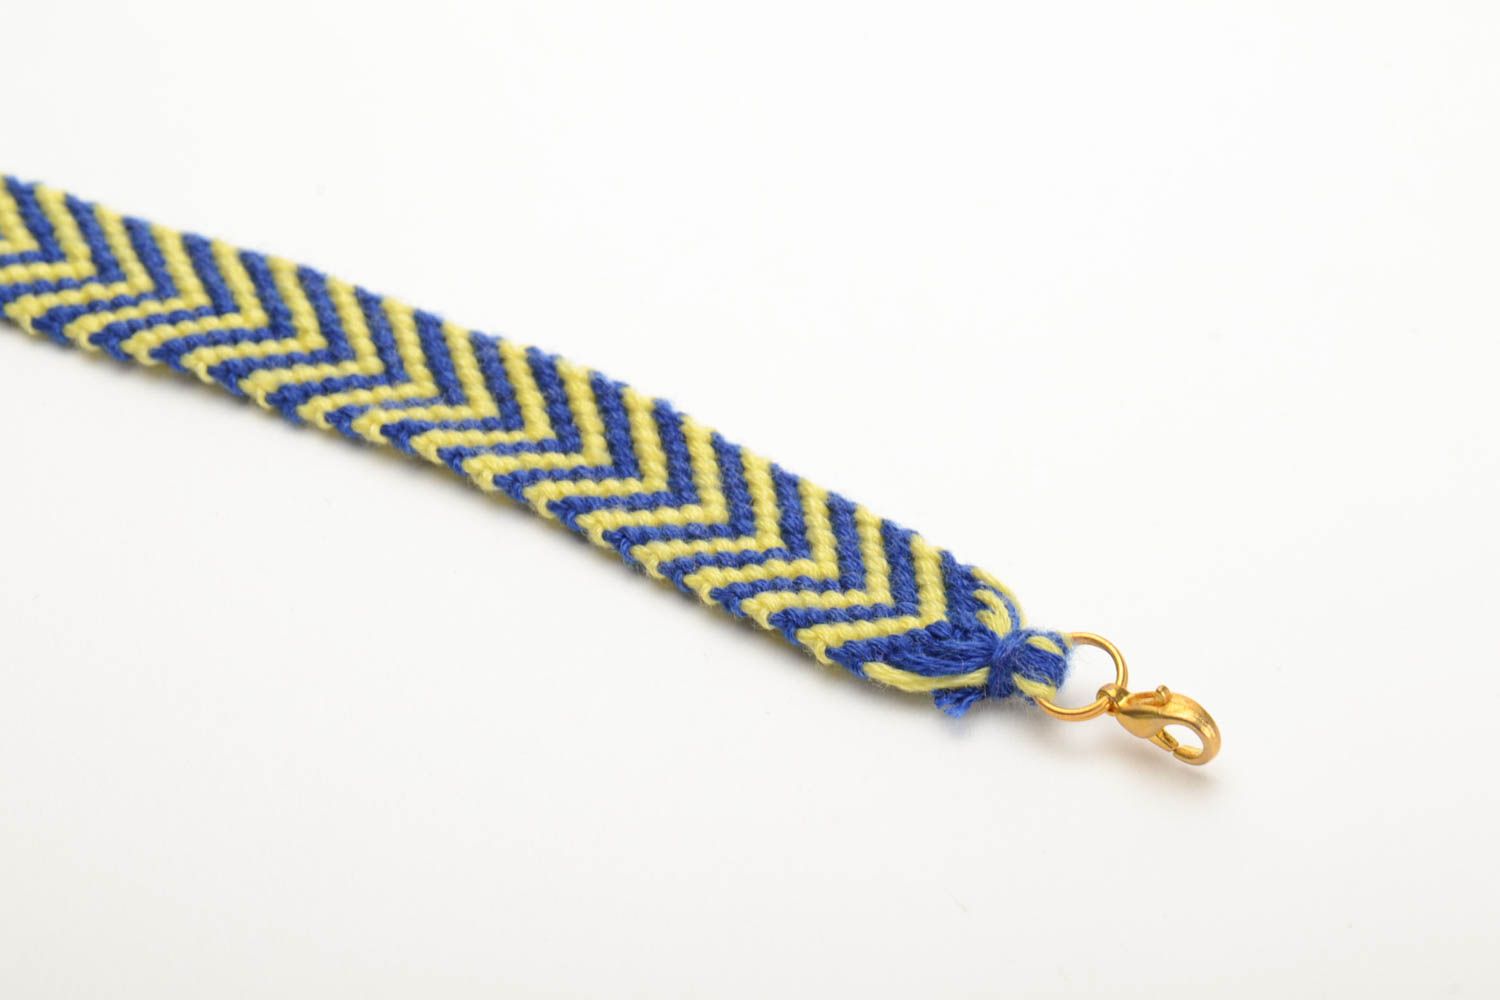 Braided handmade friendship bracelet made of floss thread delicate beautiful yellow and blue accessory photo 2